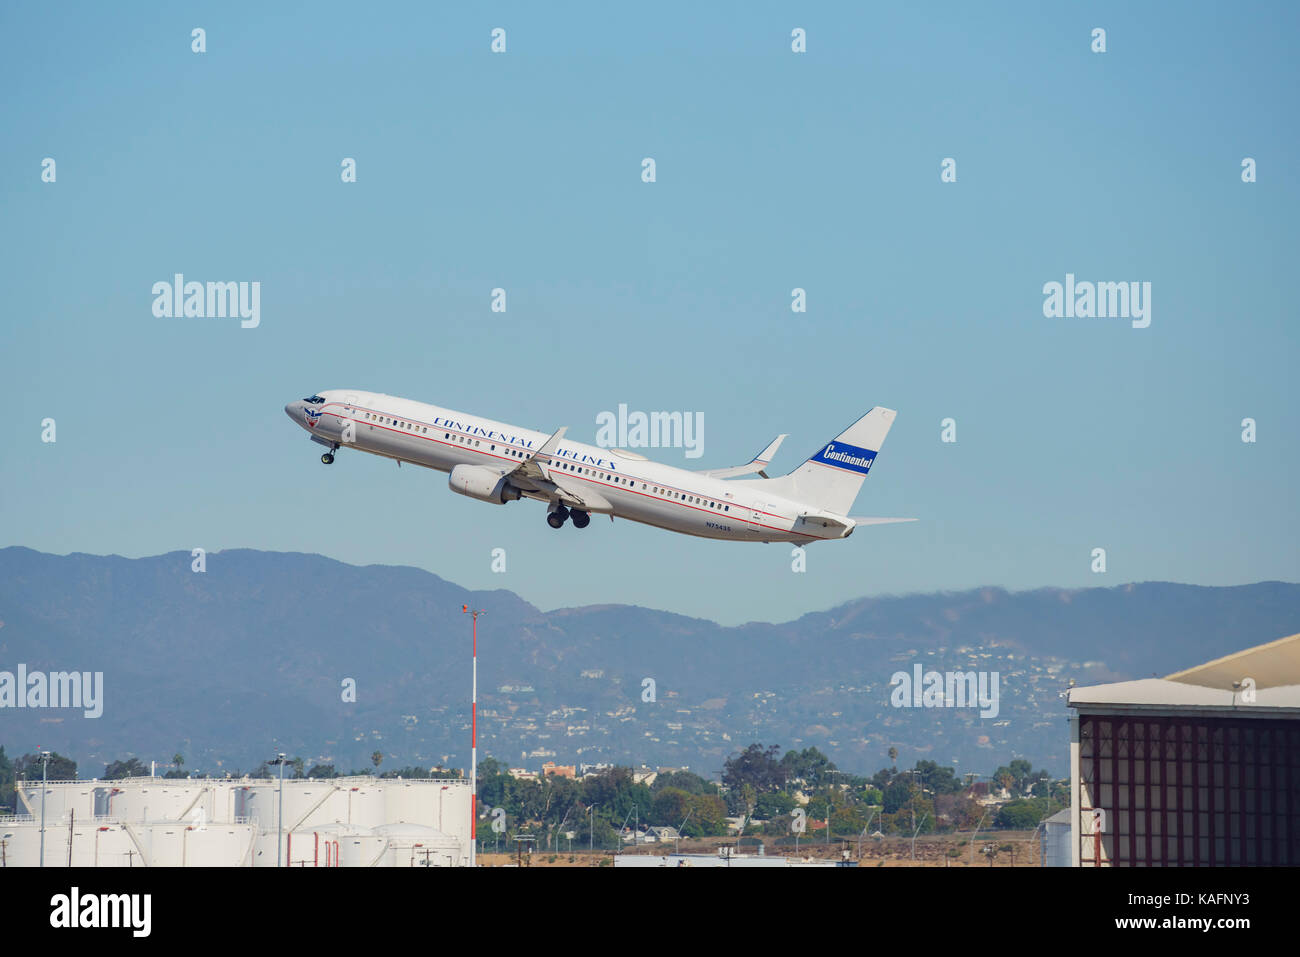 Los Angeles, SEP 24: Airplane take off from the busy Los Angeles International Airport on SEP 24, 2017 at Los Angeles, California, United States Stock Photo